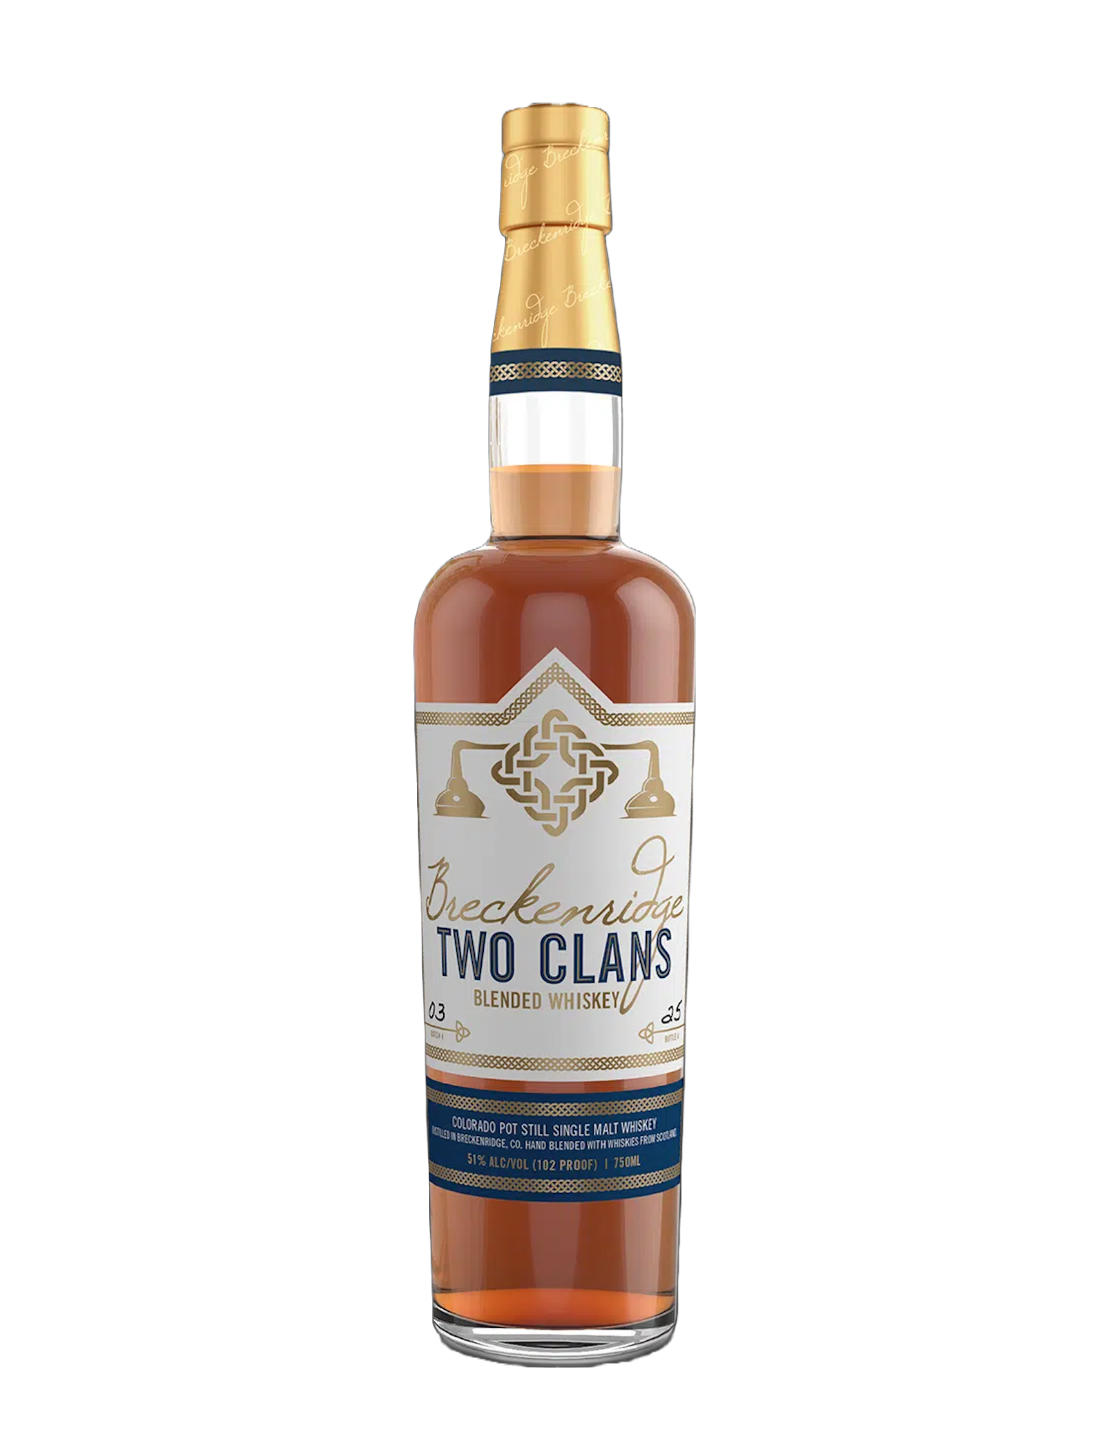 An elegant bottle of Breckenridge two clans blended whiskey behind a plain white background